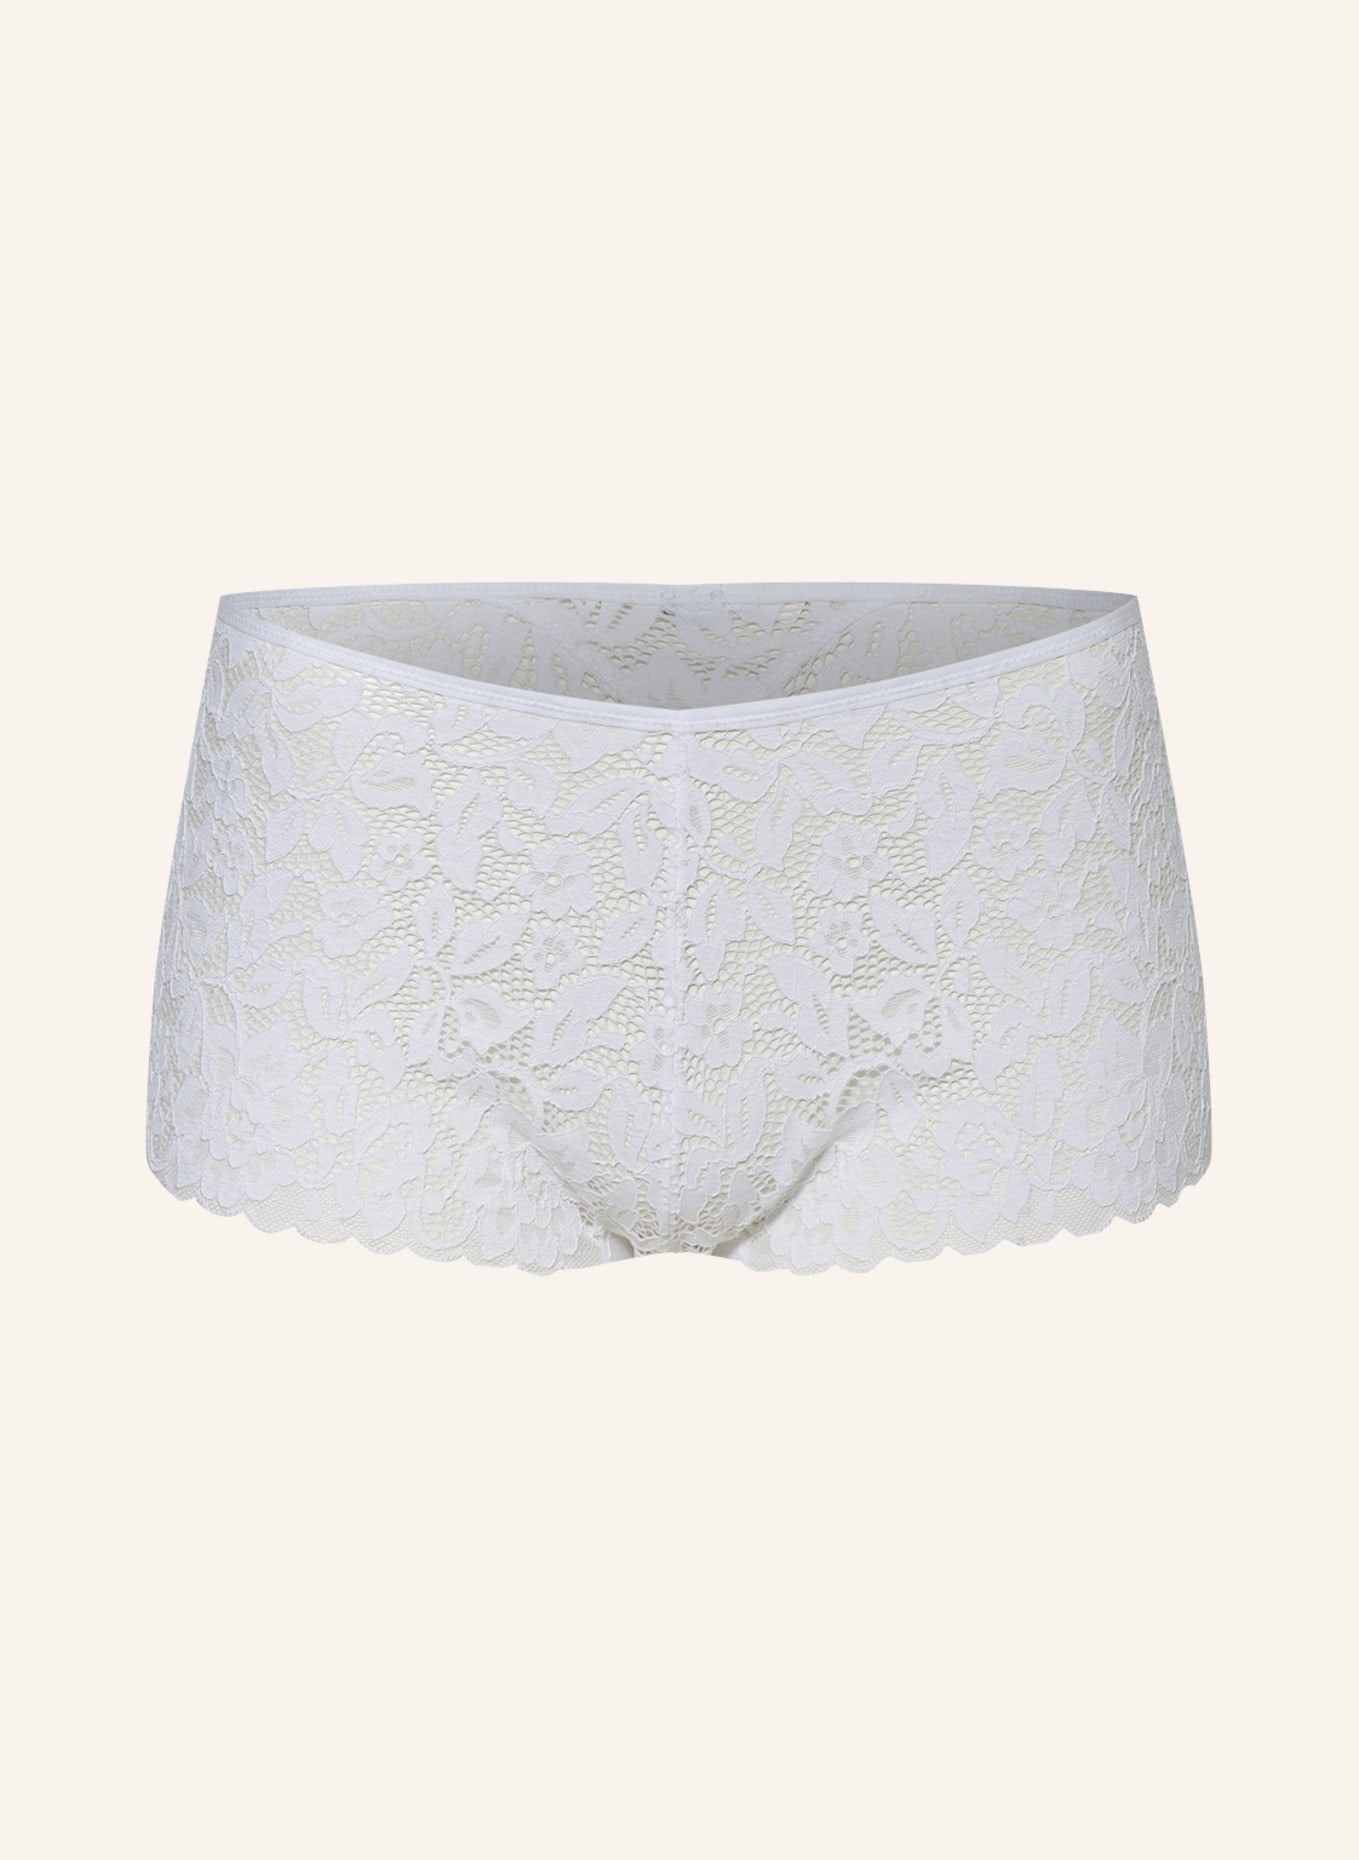 CALIDA Taillenpanty NATURAL COMFORT LACE, Farbe: WEISS (Bild 1)